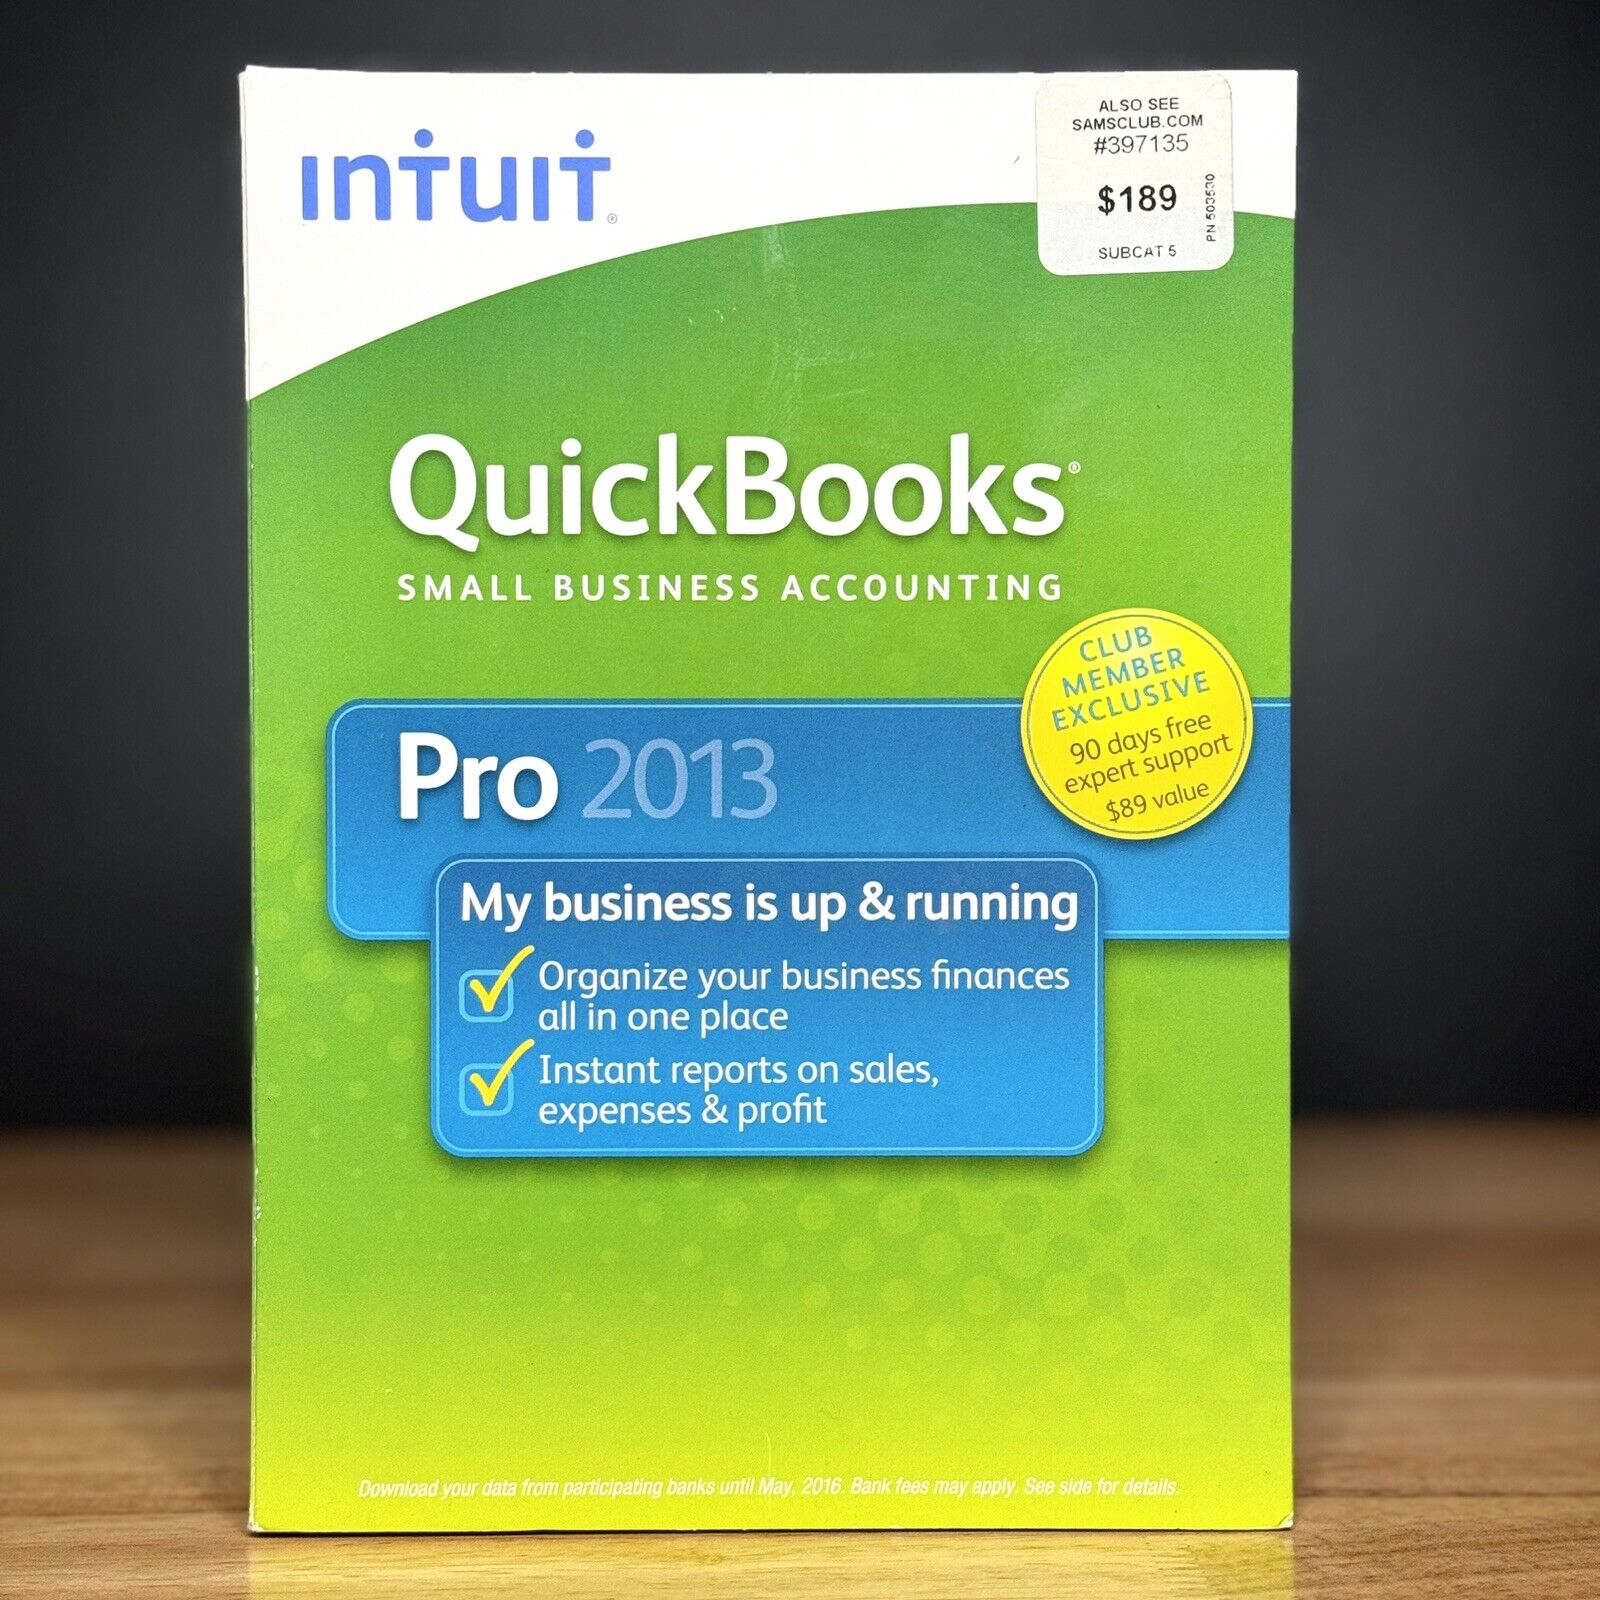 ⚡️INTUIT Quickbooks Pro 2013 Windows w/ License 👉NOT A SUBSCRIPTION ⚠️ TESTED